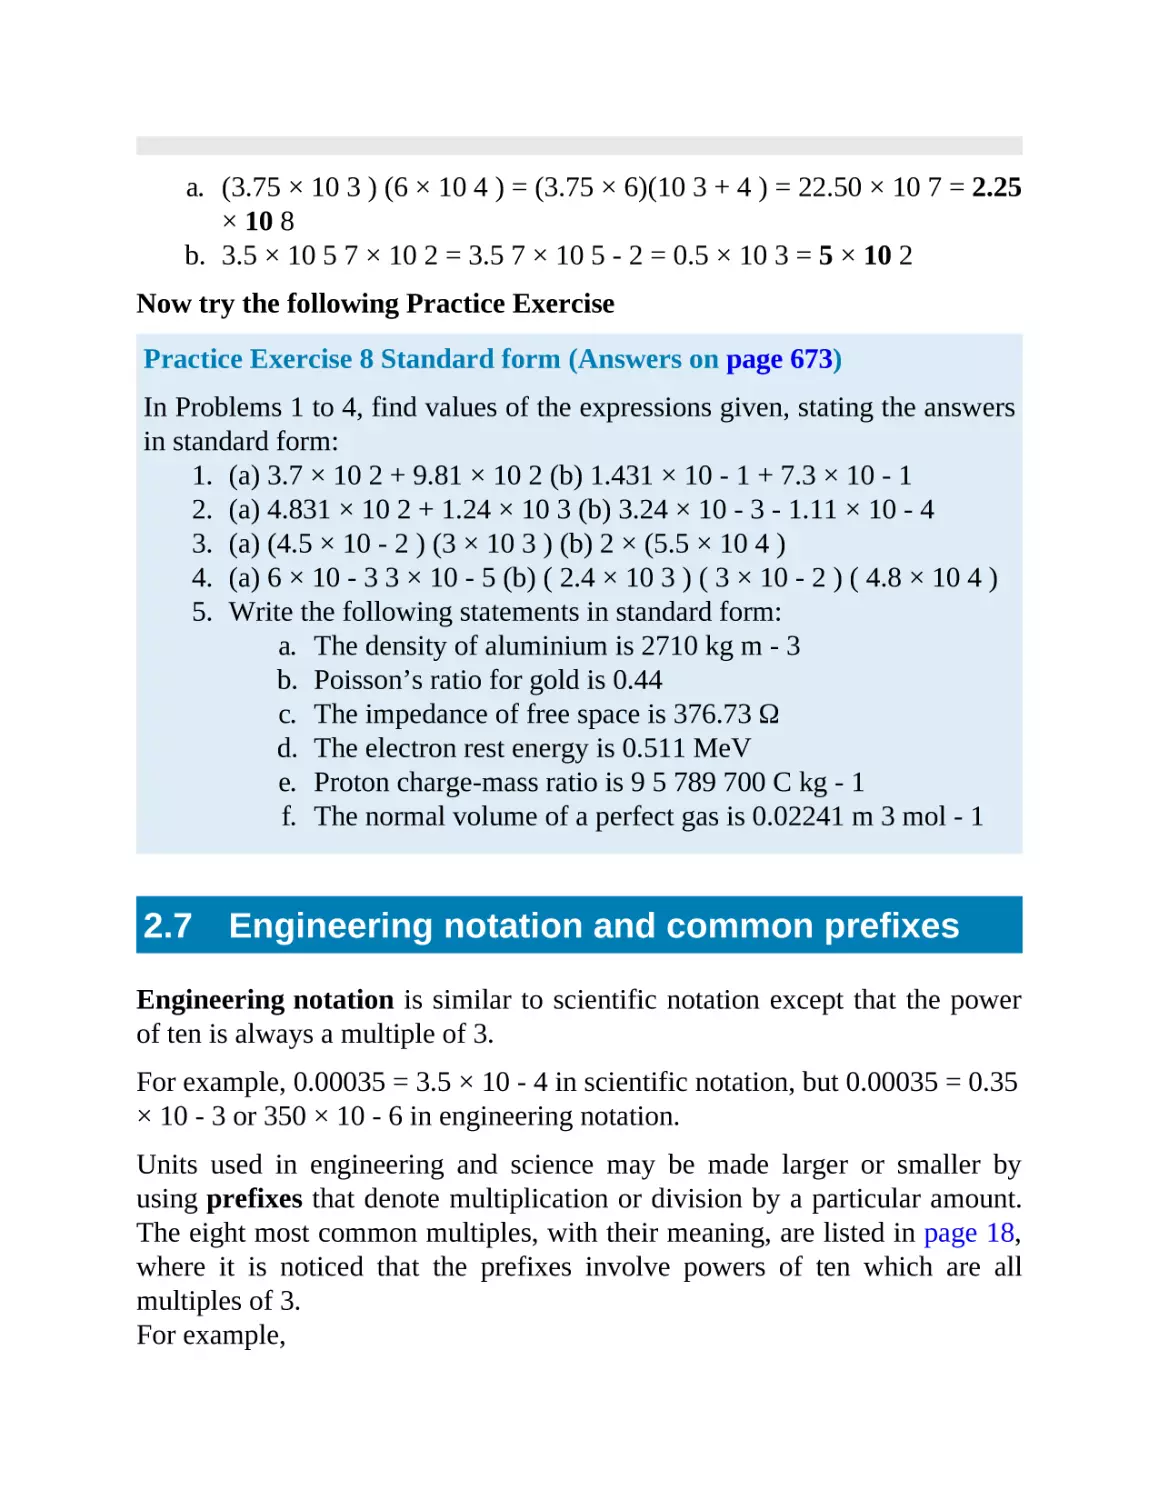 2.7 Engineering notation and common prefixes